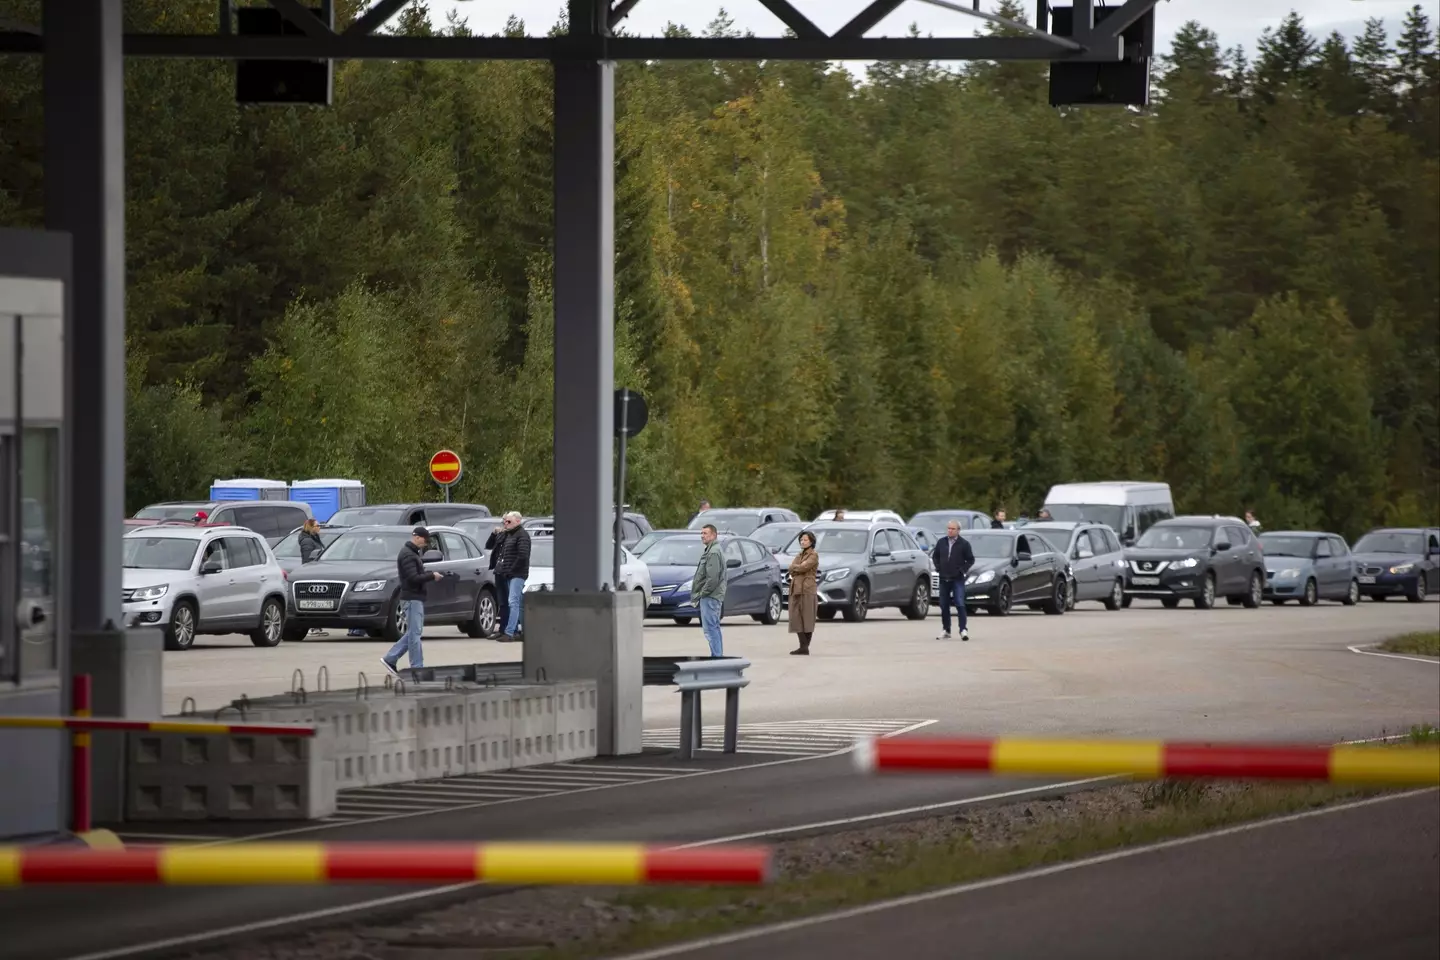 The queue of cars on the Russian border with Finland goes back for miles.